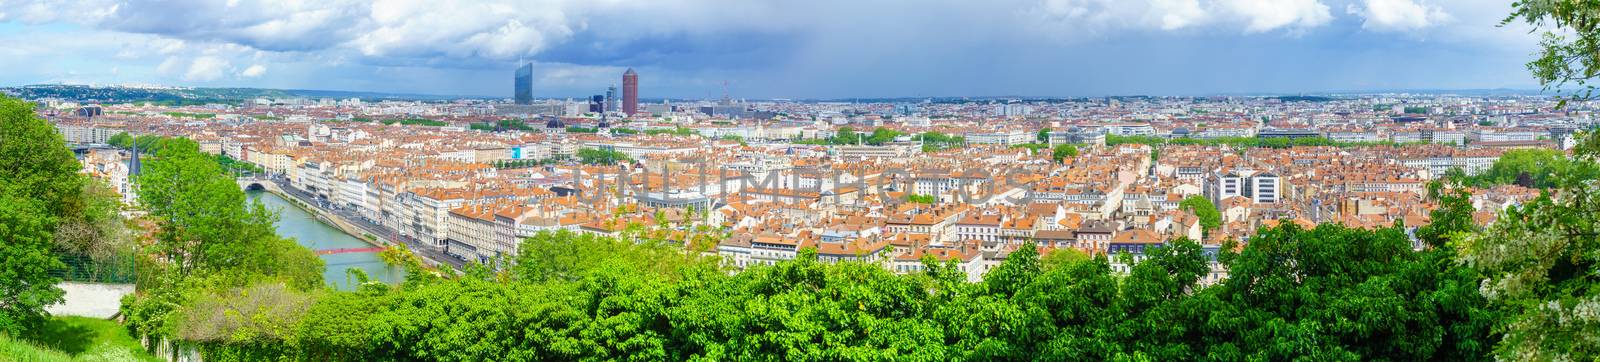 Panorama of Saone River, city center, from Abbe Larue, Lyon by RnDmS